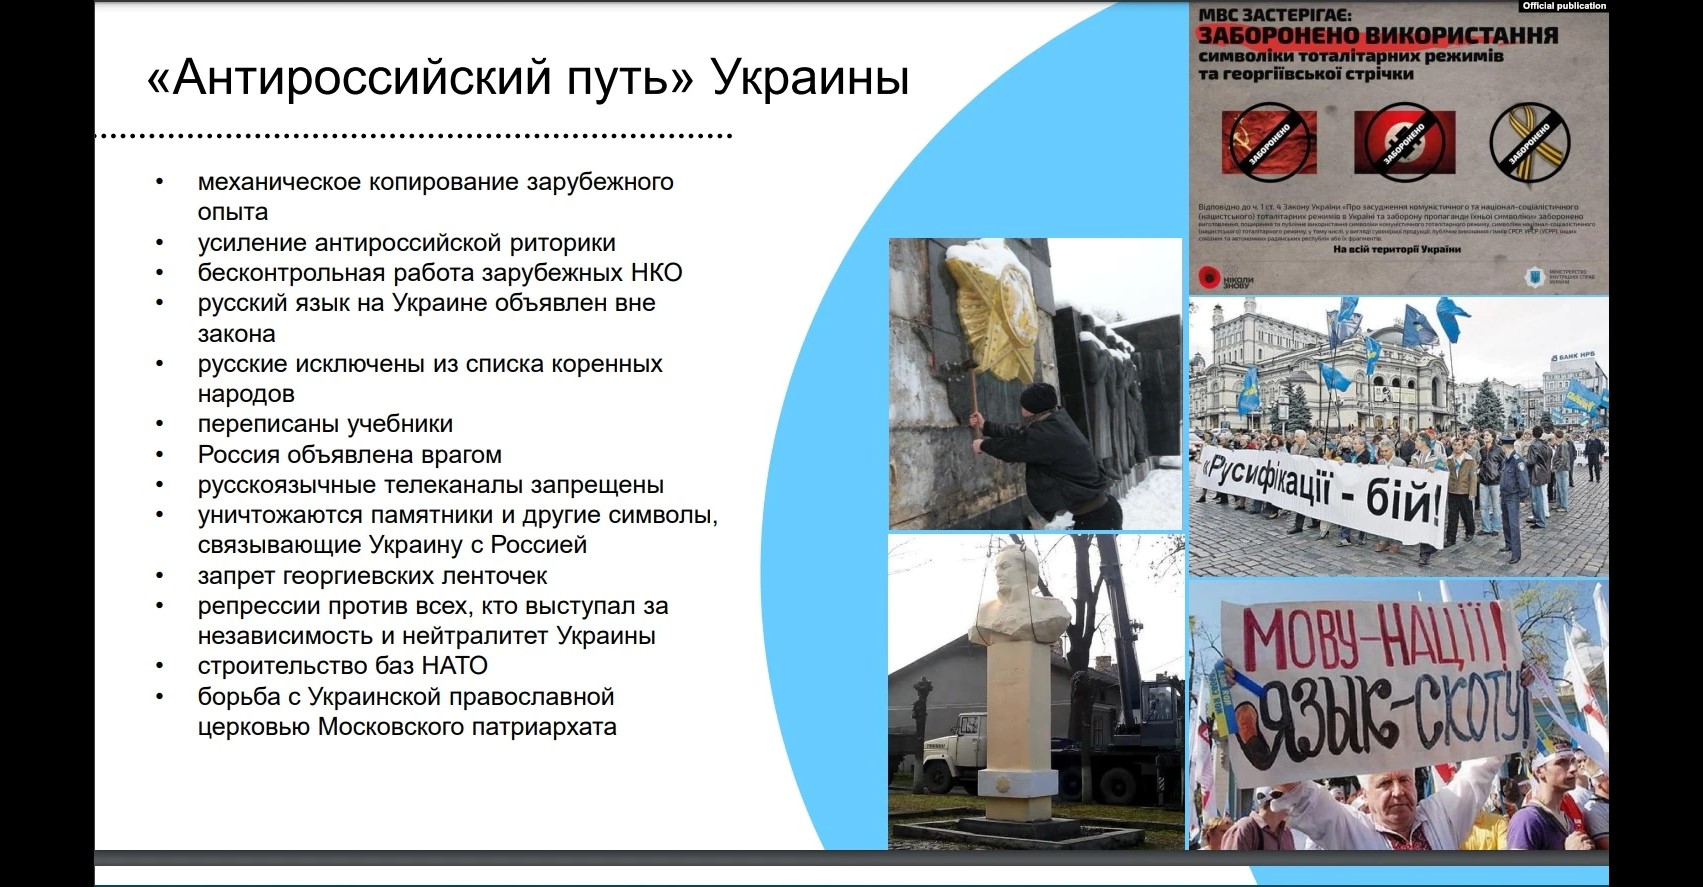 One of the propaganda slides Moscow uses in Russian schools to instill hate for Ukraine and Ukrainians. This slide is titled "Anti-Russian path of Ukraine" (Credit: Russian official publication)